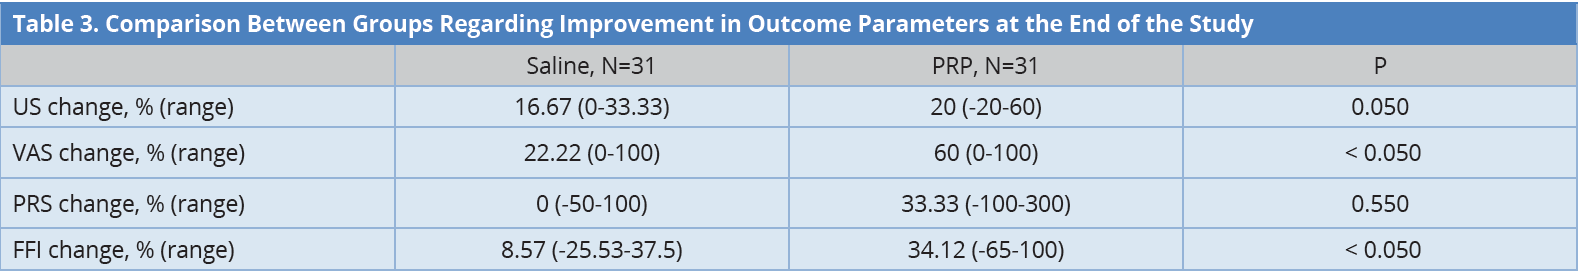 Table 3.PNGComparison between groups regarding improvement in outcome parameters at the end of the study.<br><sup>The data were presented in median. FFI, foot function index; PRP, platelet-rich plasma; US, ultrasonography; VAS, visual analogue scale.</sup>